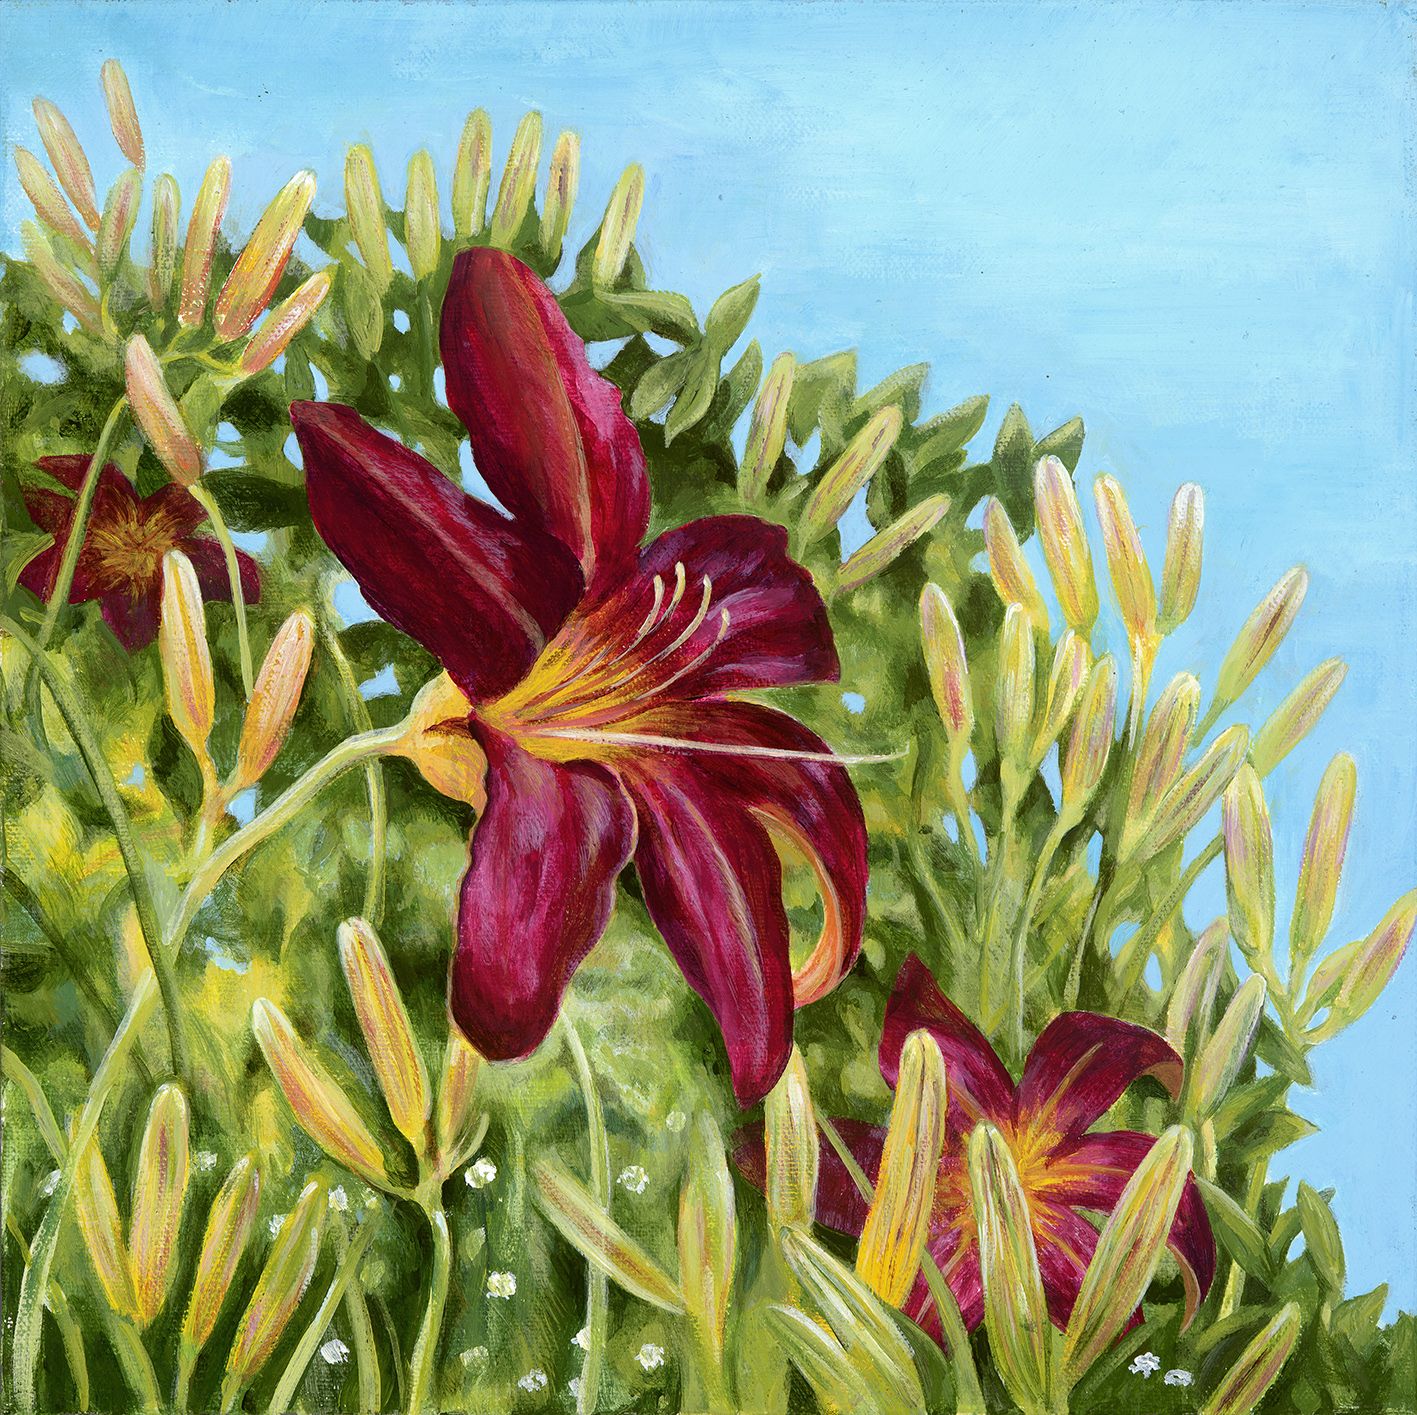 Daylily by Jane Peart